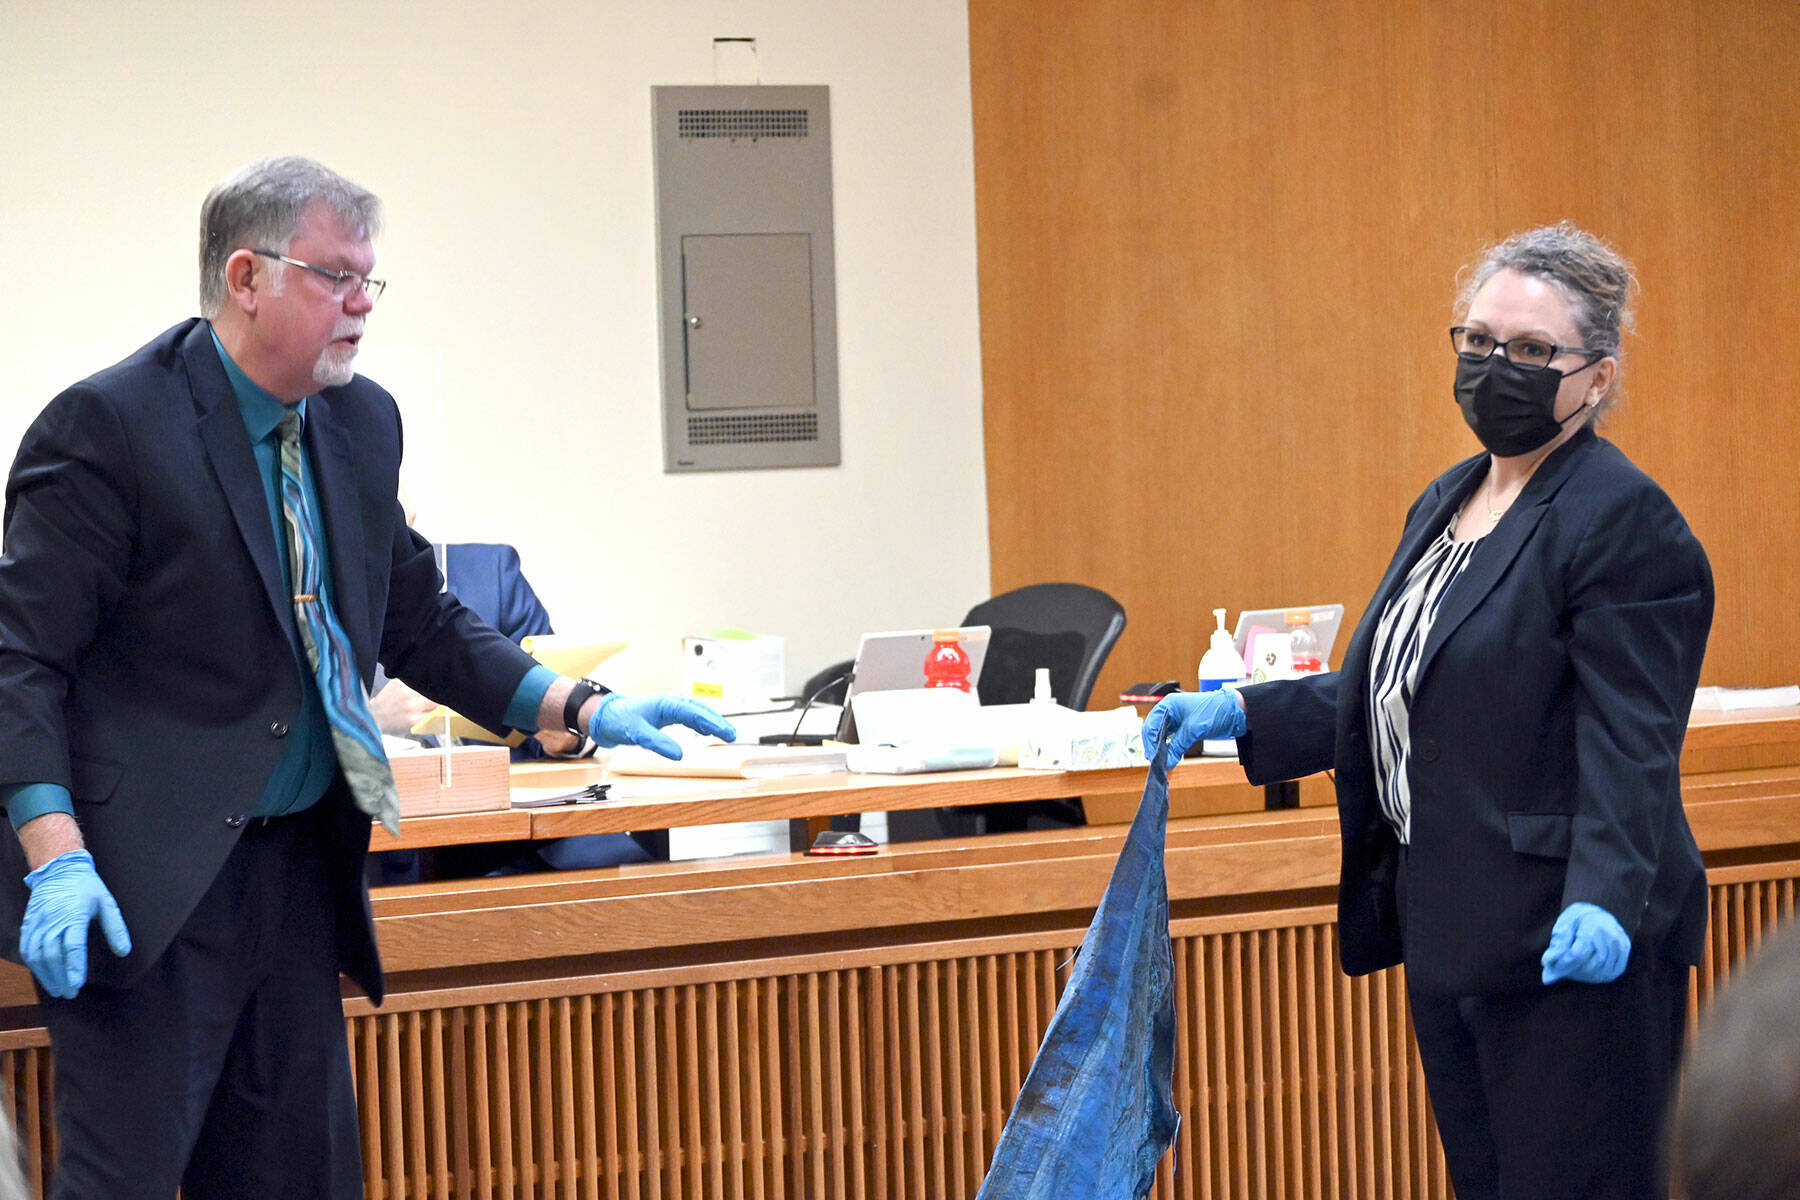 State Patrol Forensic Analyst Johan Schoeman, left, and Michele Devlin, deputy prosecuting attorney, on Monday show the jury in Dennis Bauer’s murder trial the tarp that was wrapped around the body of victim Darrell Iverson. (Paul Gottlieb/Peninsula Daily News)